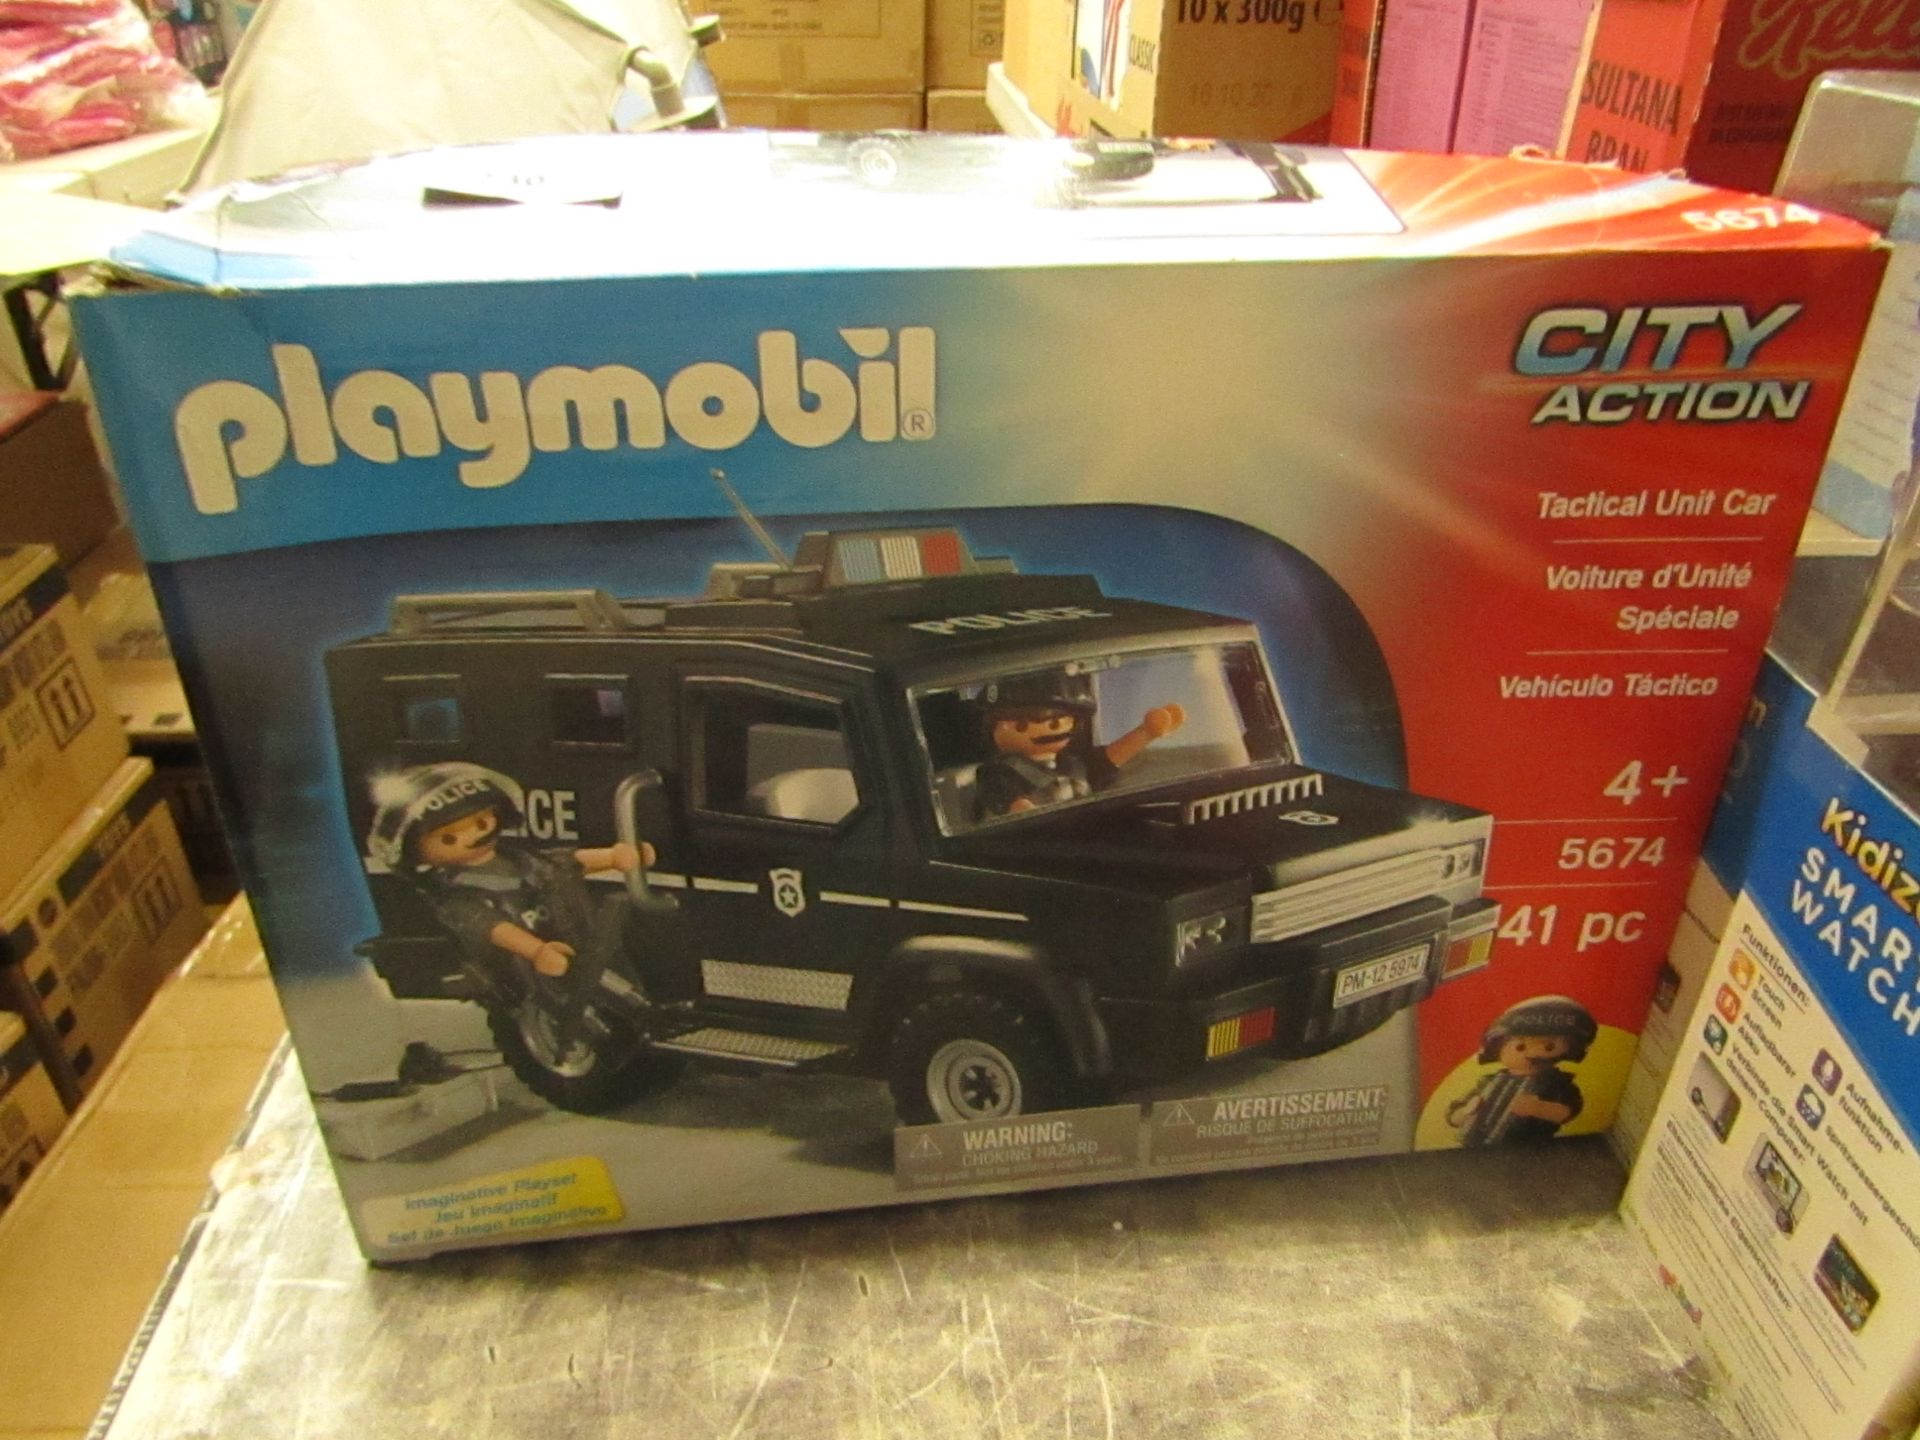 Playmobile 5674City Action tactical Unit car paly set, the out box is a bity crushed but contents